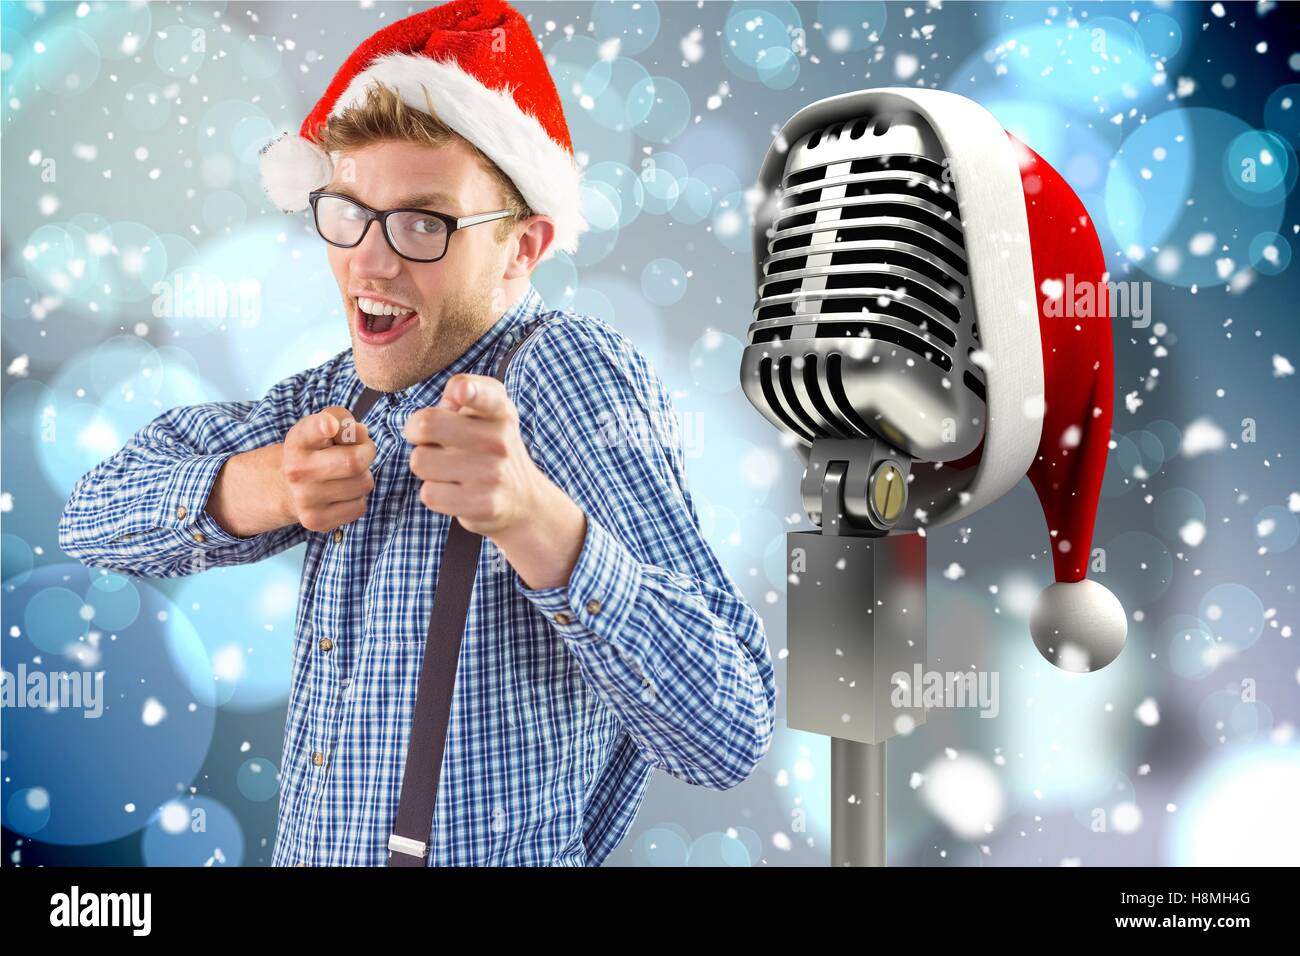 Man gesturing towards microphone with santa hat against digitally generated background Stock Photo